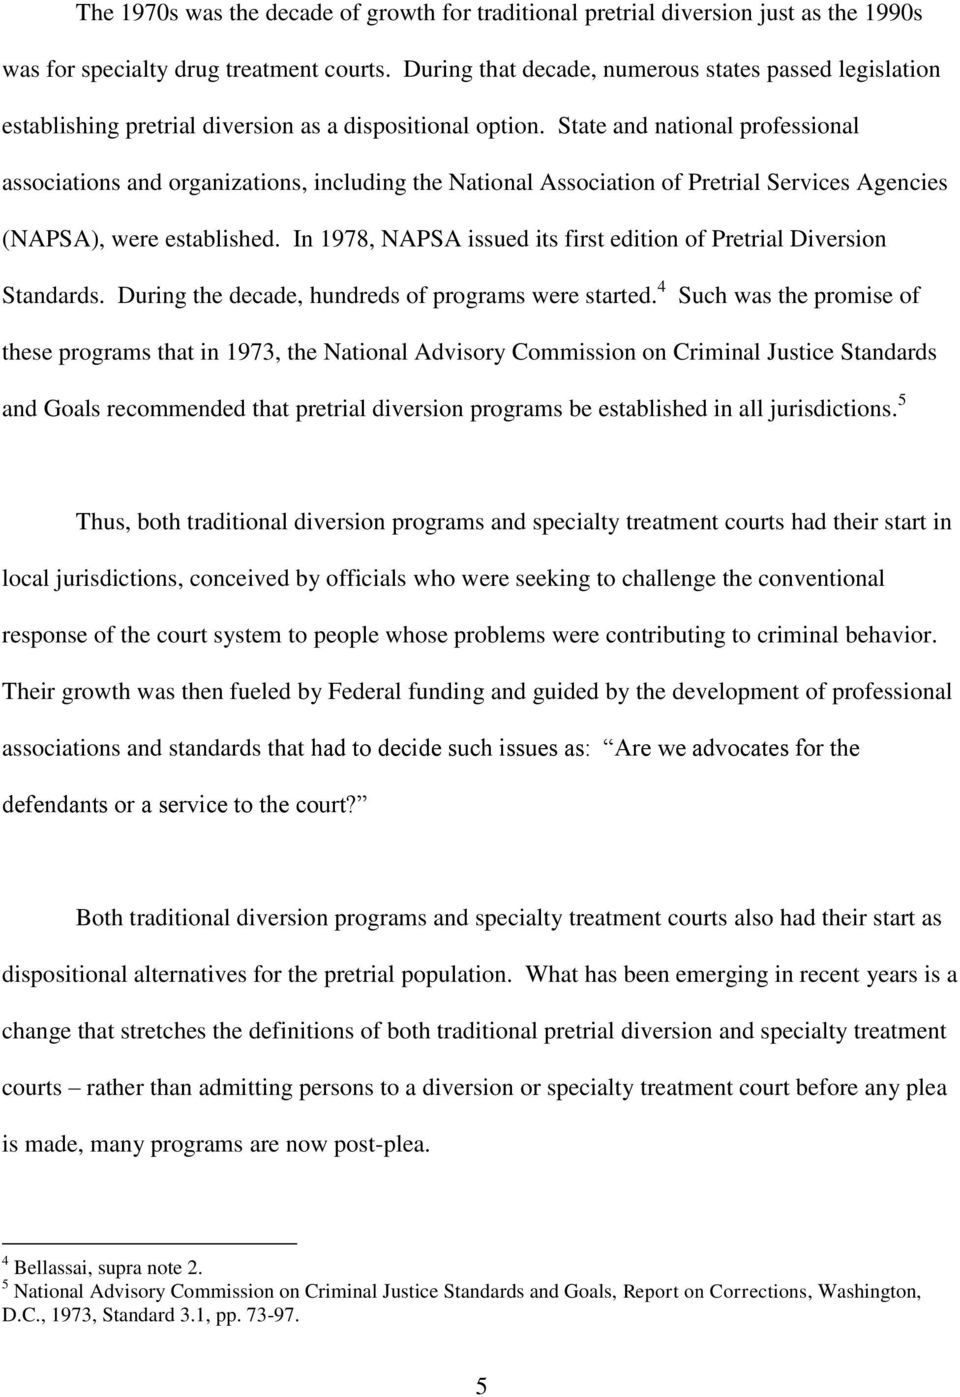 State and national professional associations and organizations, including the National Association of Pretrial Services Agencies (NAPSA), were established.